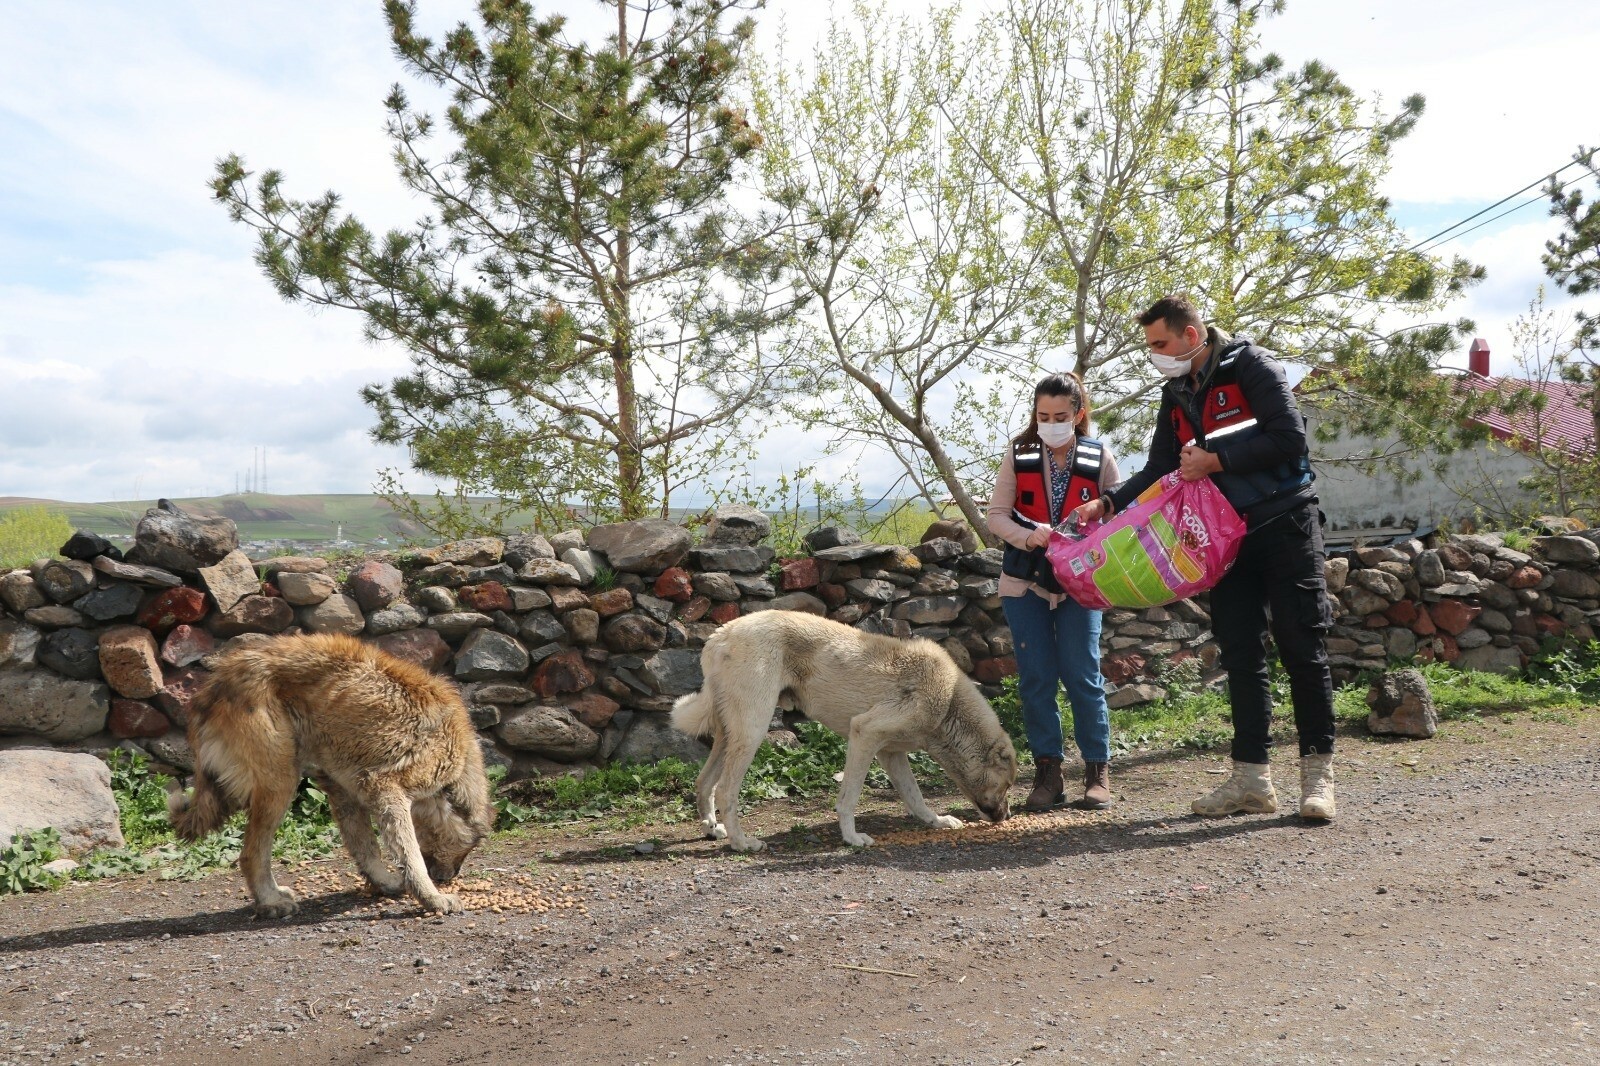 Turks take to streets to feed stray animals during nationwide lockdown